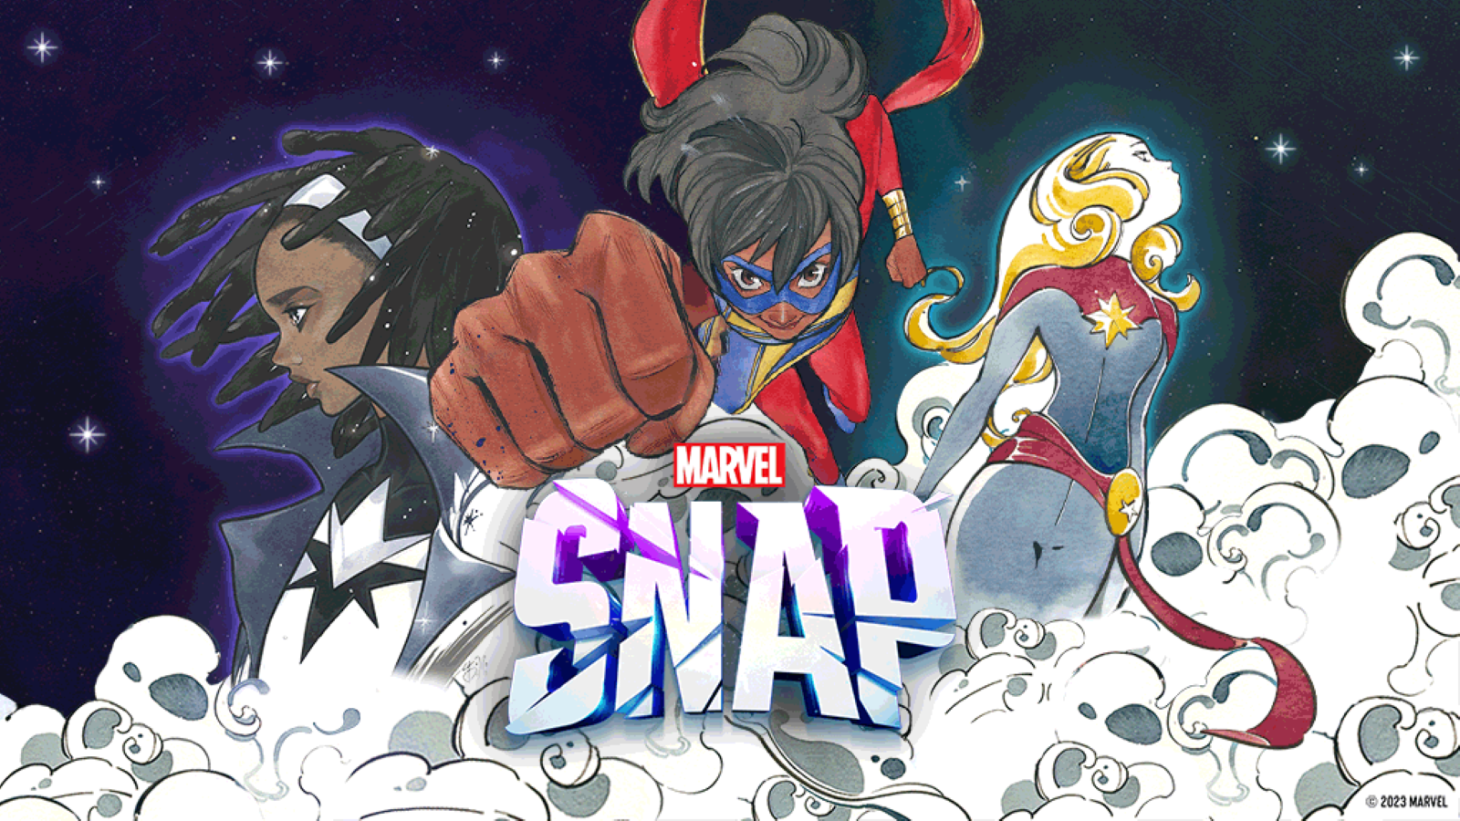 Everything you need to know about Marvel SNAP launching October 18, 2022